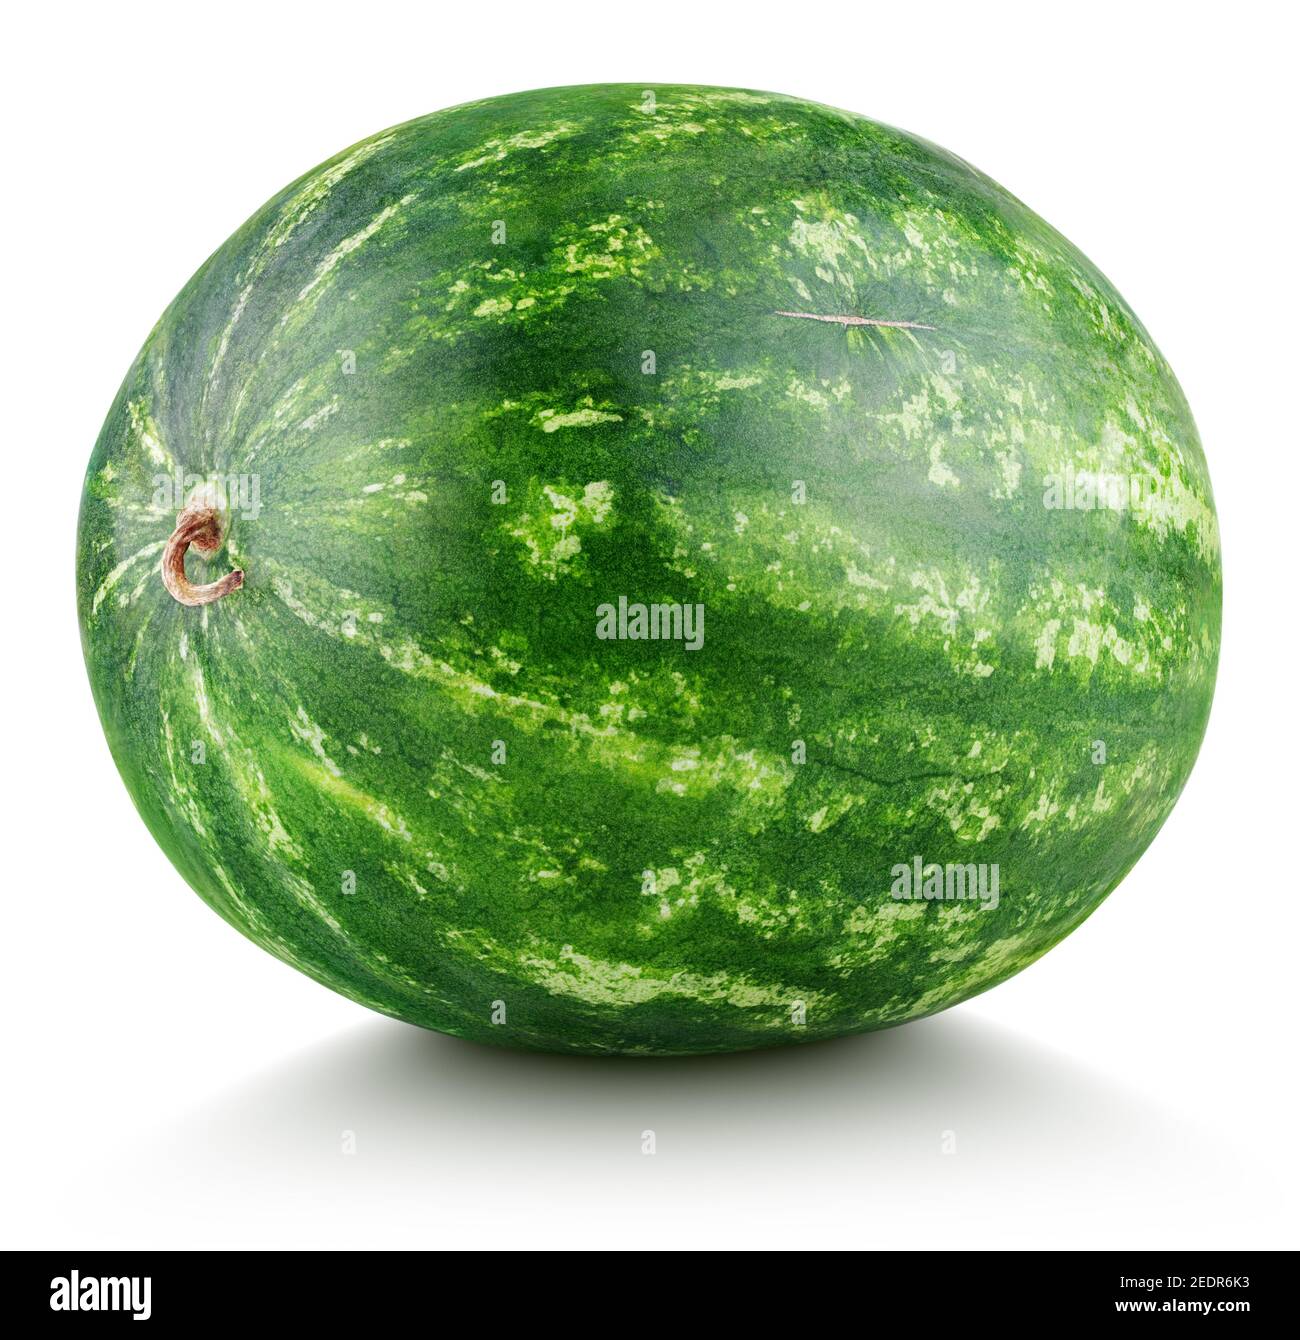 Single whole watermelon isolated on white background with clipping path Stock Photo